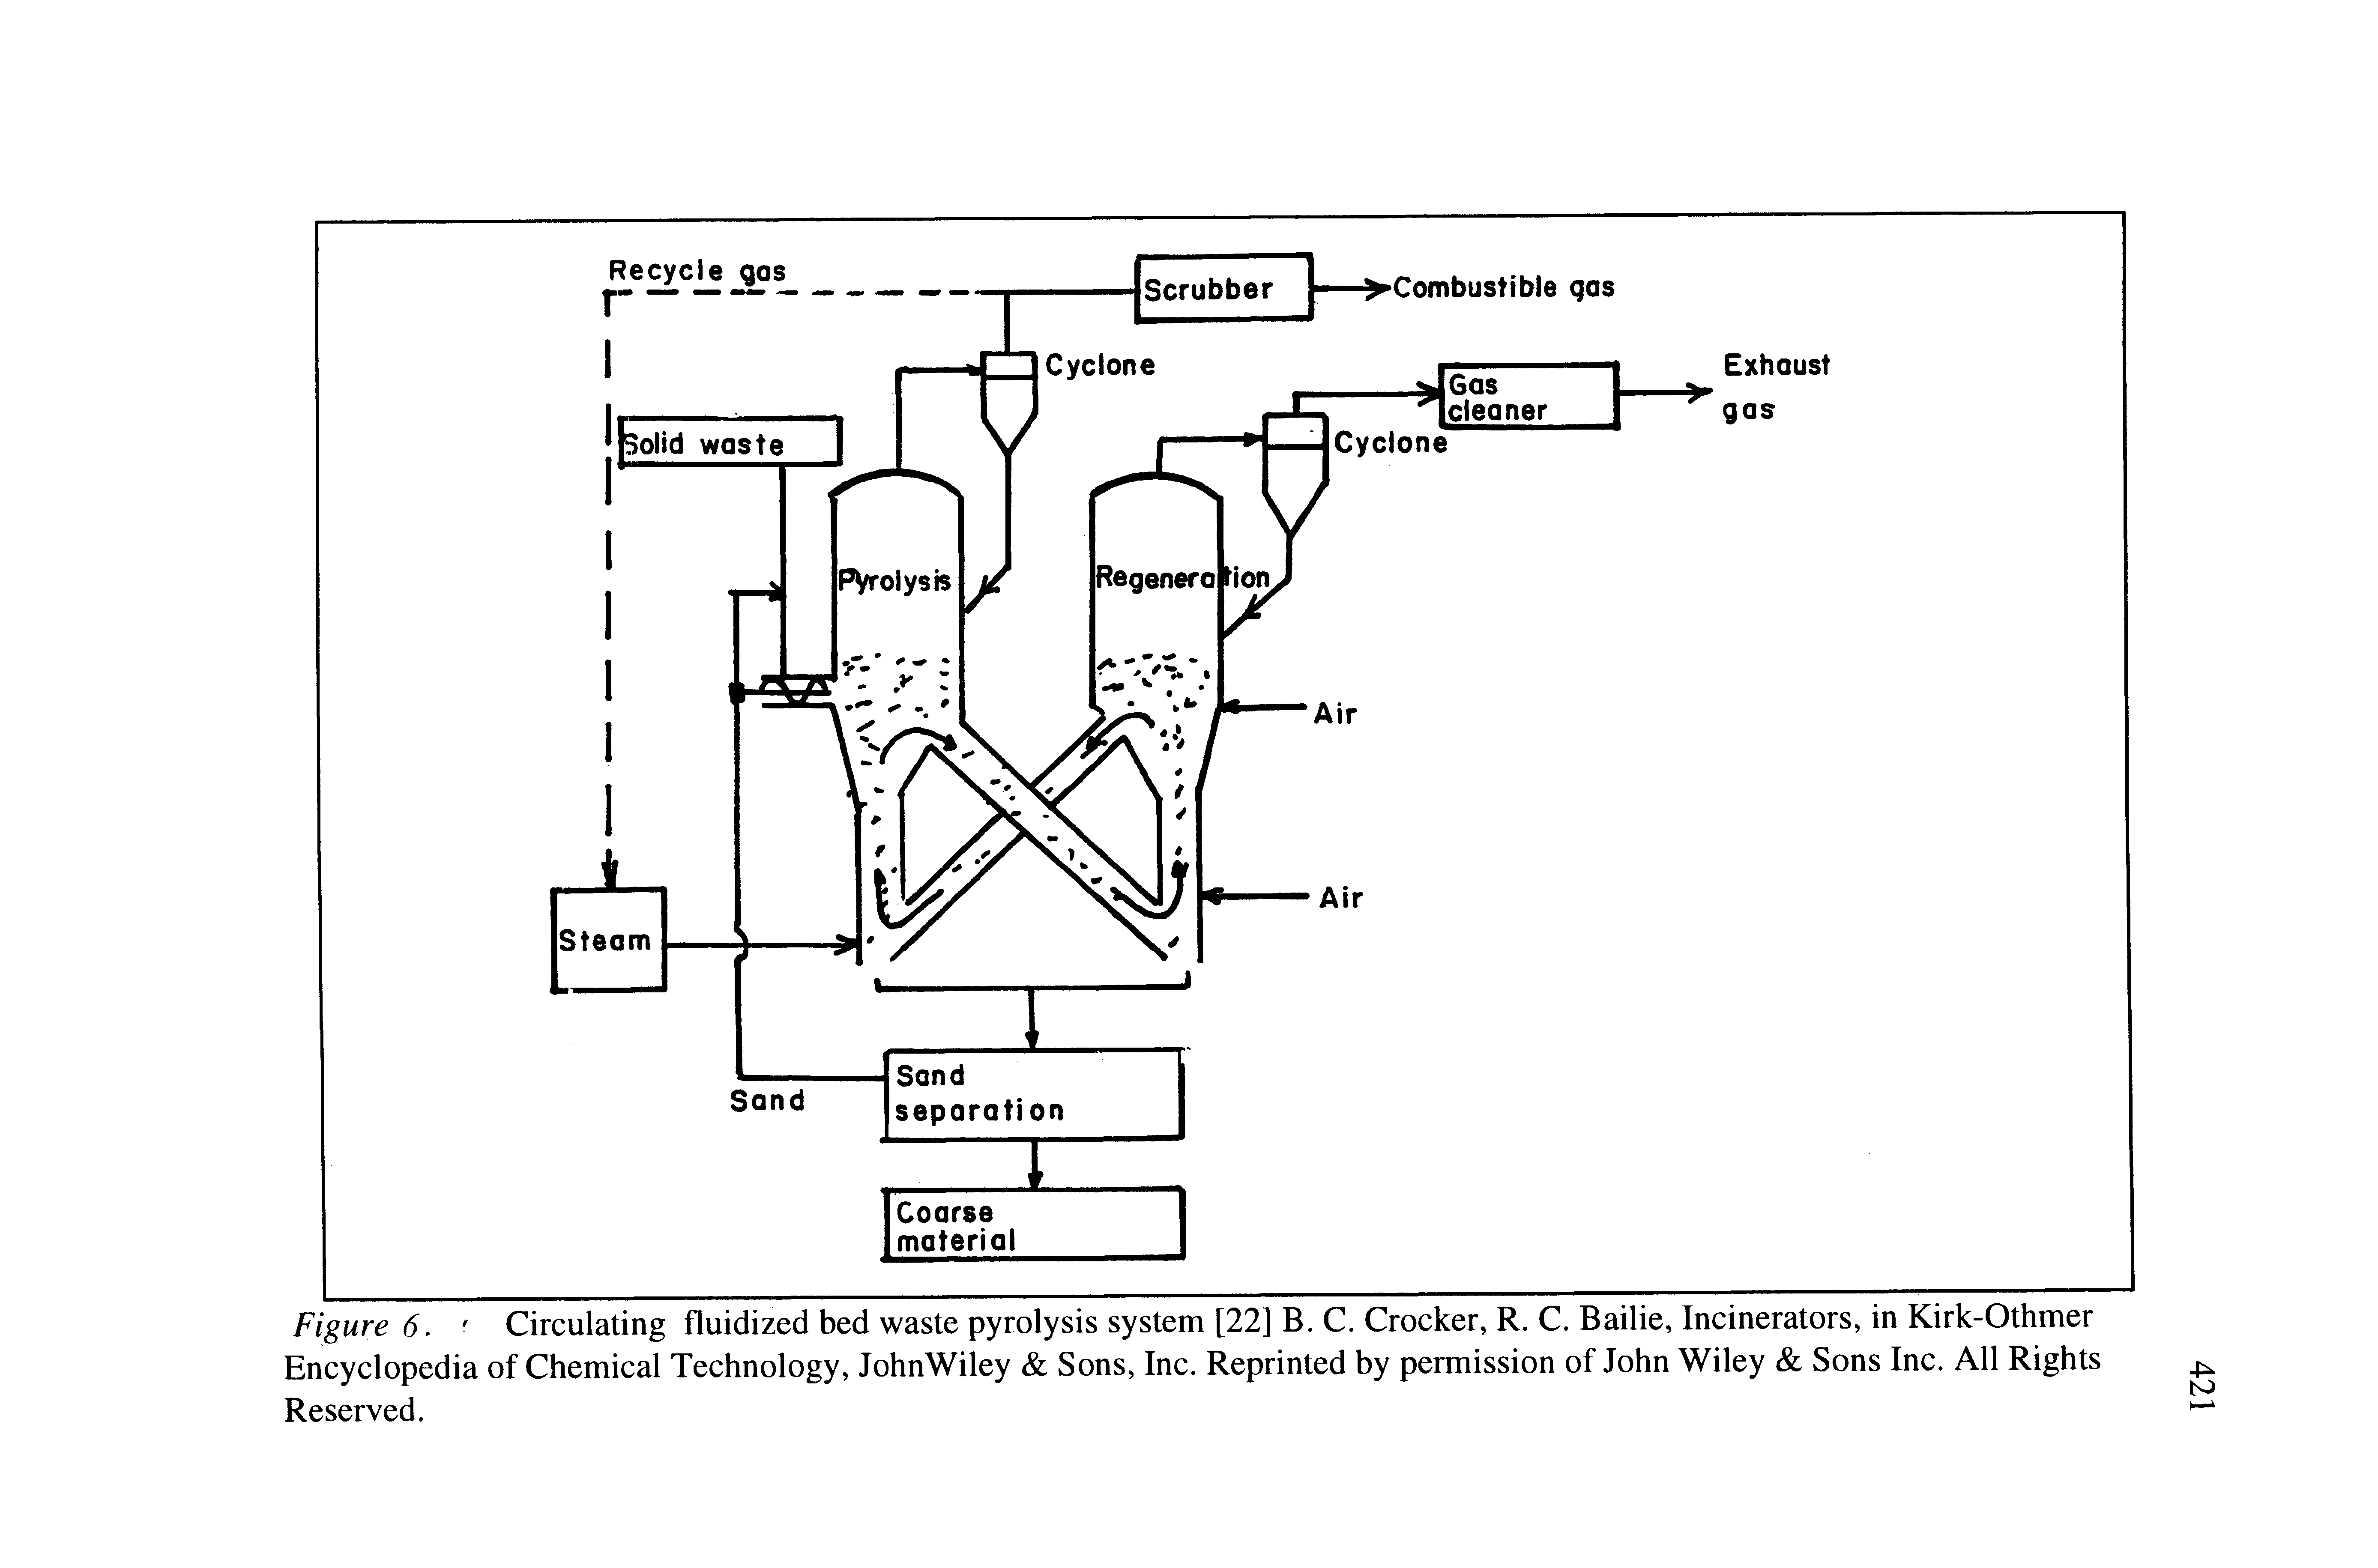 Figure 6. Circulating fluidized bed waste pyrolysis system [22] B. C. Crocker, R. C. Bailie, Incinerators, in Kirk-Othmer Encyclopedia of Chemical Technology, JohnWiley Sons, Inc. Reprinted by permission of John Wiley Sons Inc. All Rights Reserved.